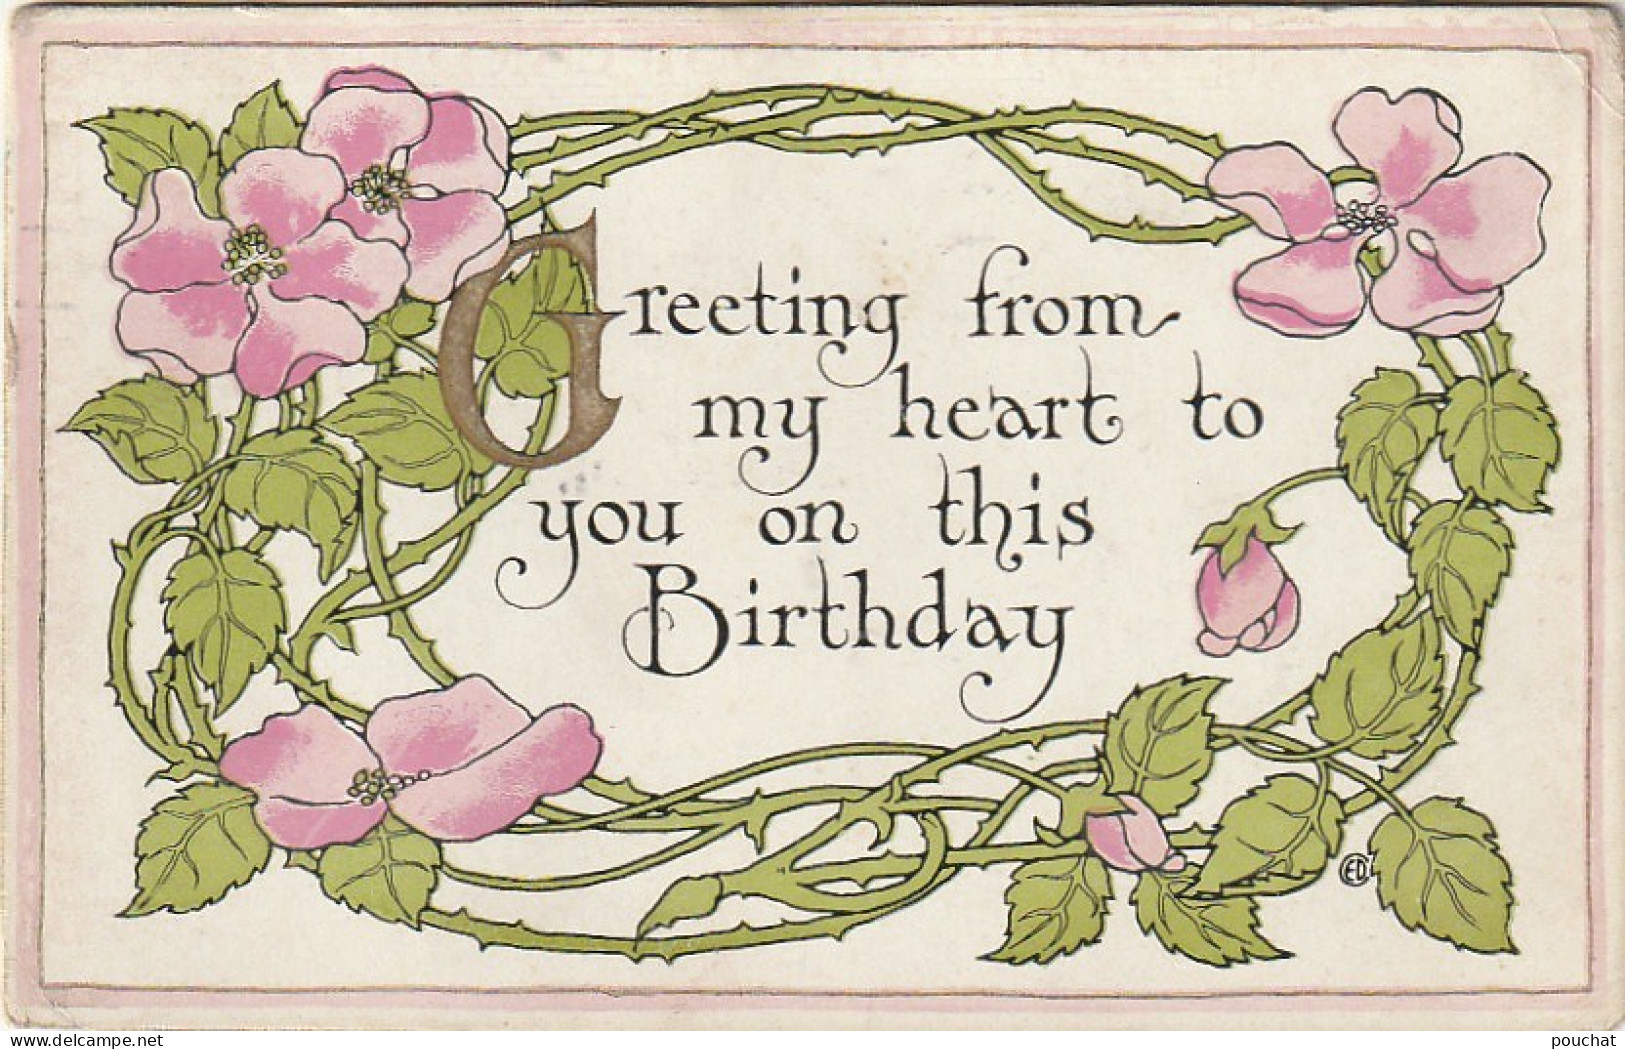 Z+ 6- " GREETING .. TO YOU ON THIS BIRTHDAY " - CARTE ANNIVERSAIRE  FANTAISIE - TIGES DE ROSES ENCHEVETREES  - 2 SCANS - Birthday